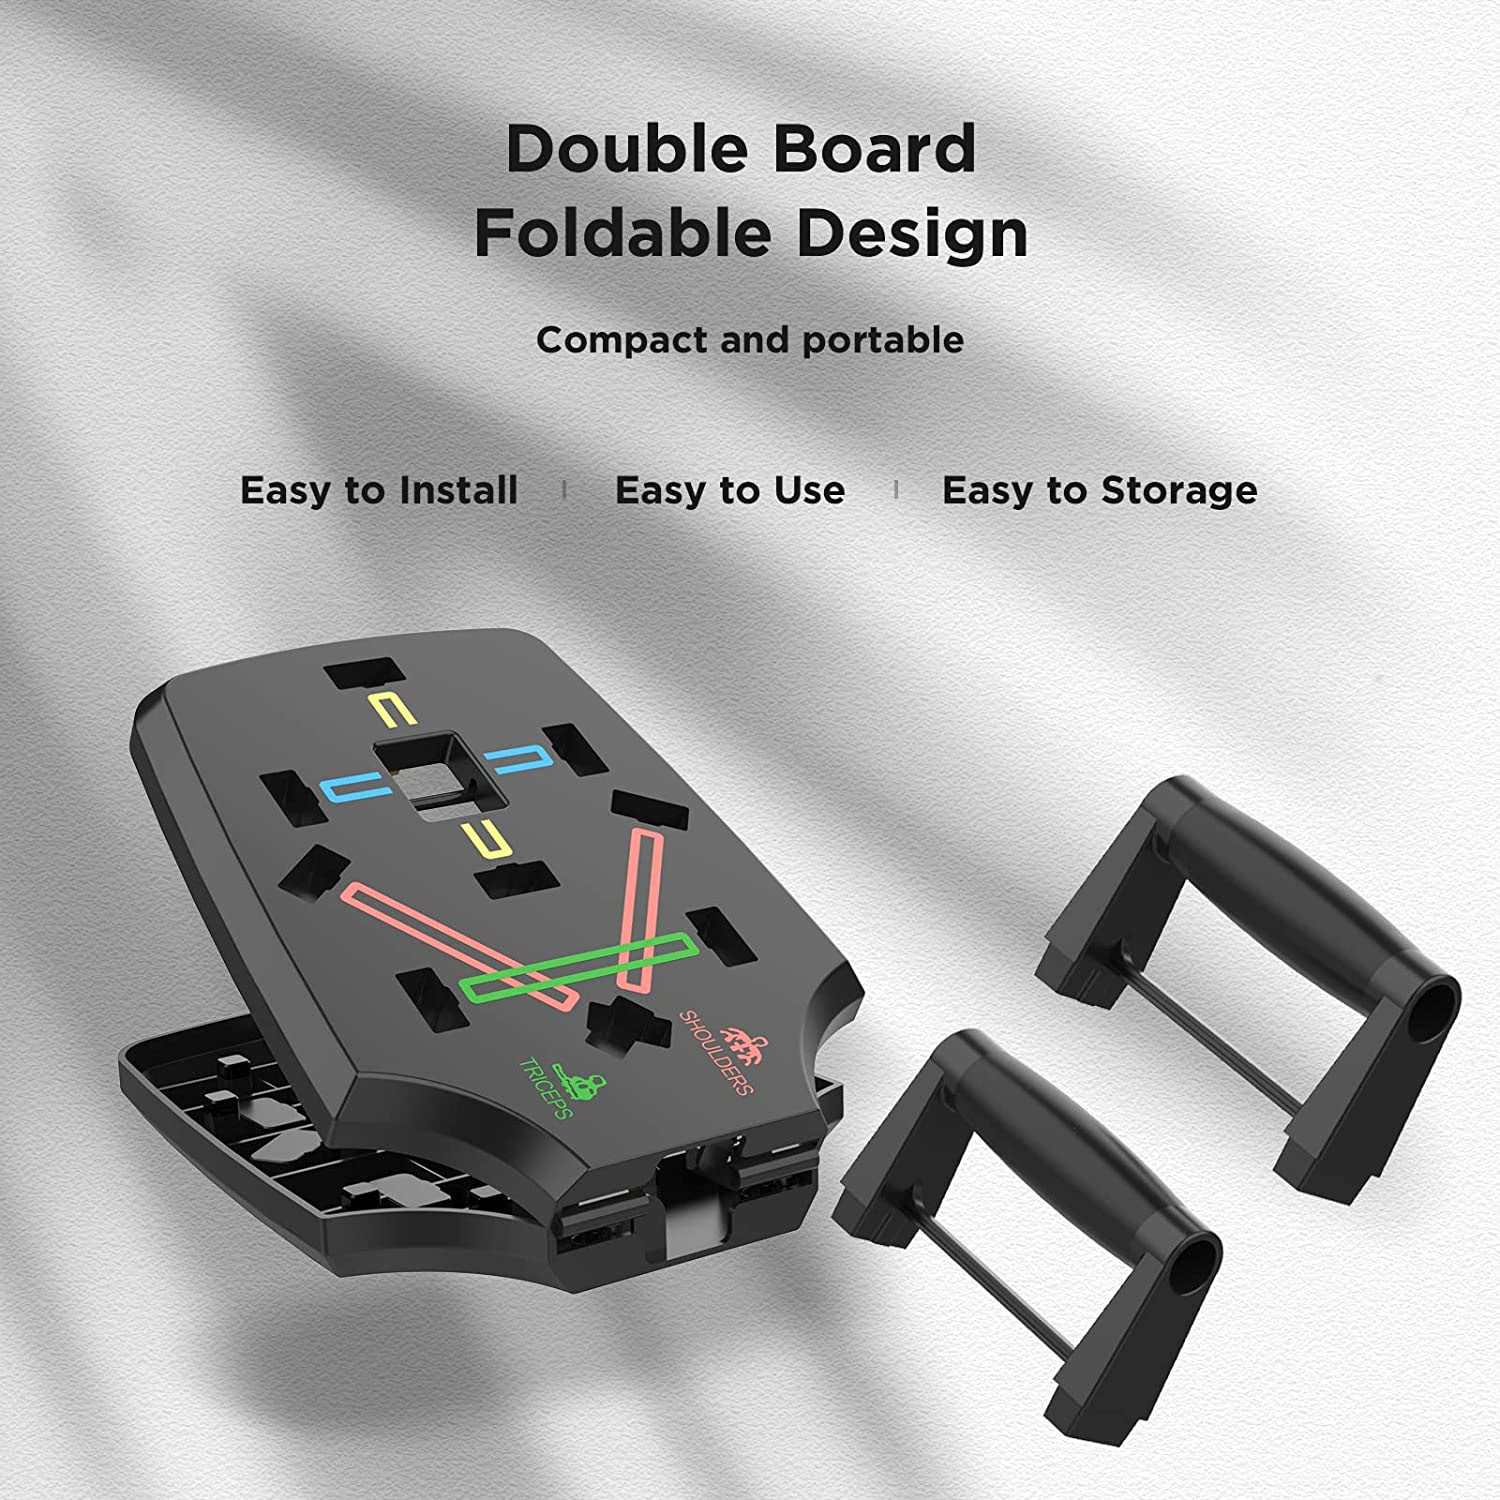 AERLANG Portable Multi-Function Foldable 10 in 1 Push Up Board. 600 units. EXW Los Angeles $9.50 unit.